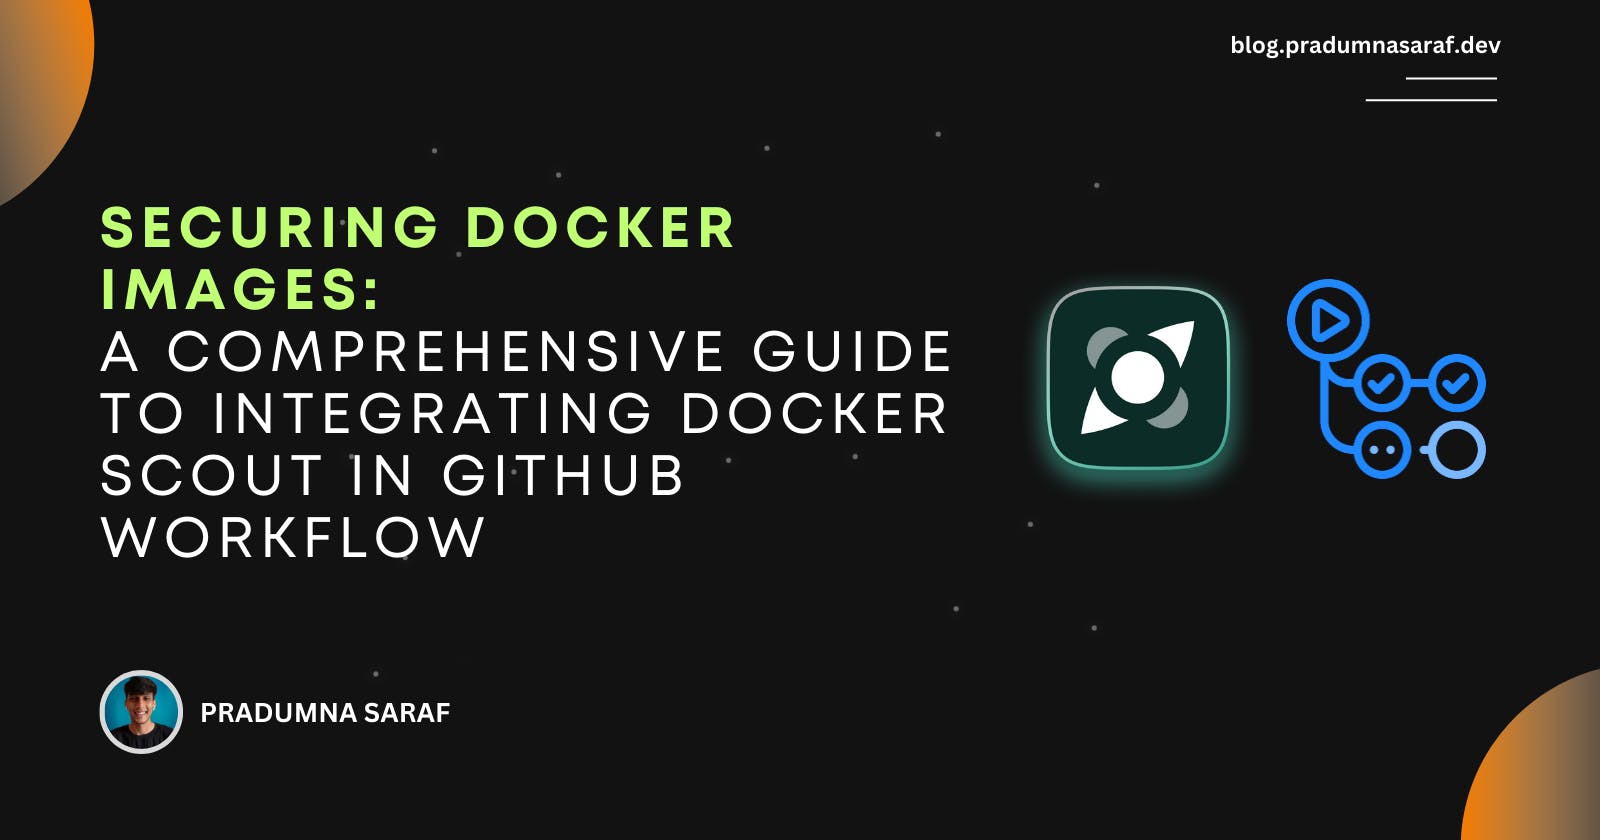 Securing Docker Images: A Comprehensive Guide to Integrating Docker Scout in GitHub Workflow